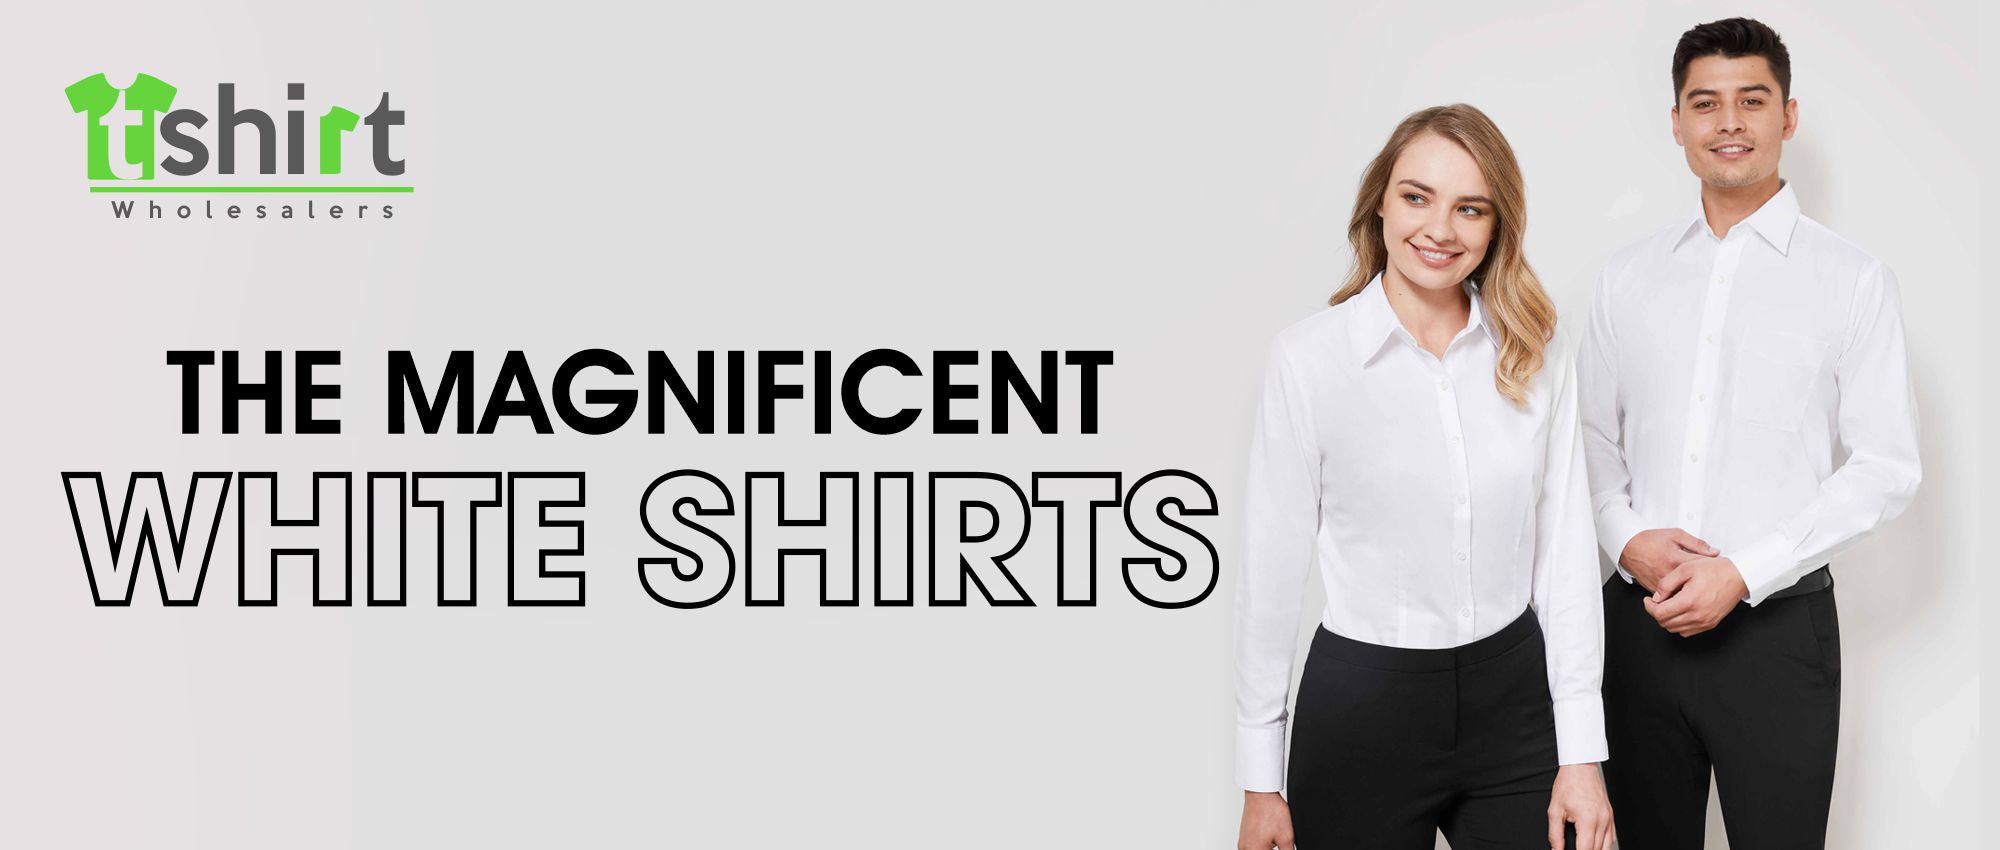 THE MAGNIFICENT WHITE SHIRTS